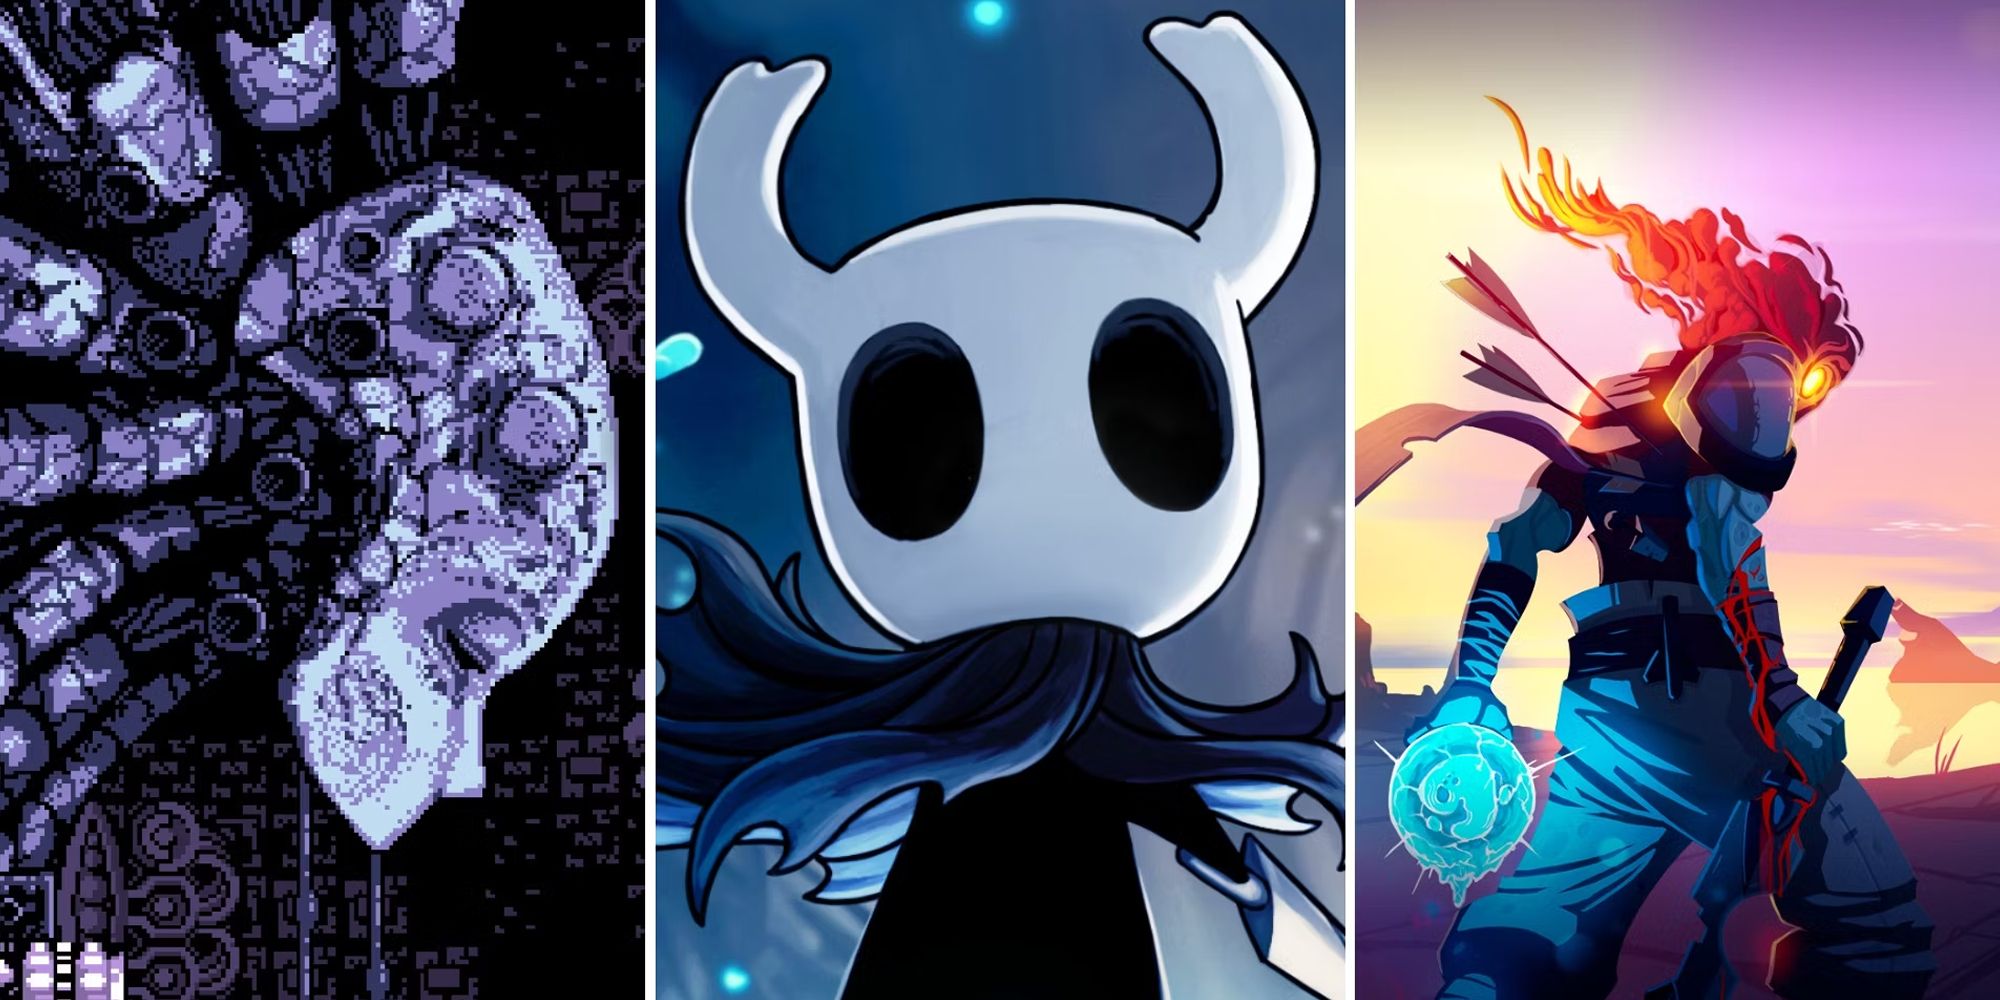 A Split Image Depicting Scenes From Axiom Verge, Hollow Knight, And Dead Cells